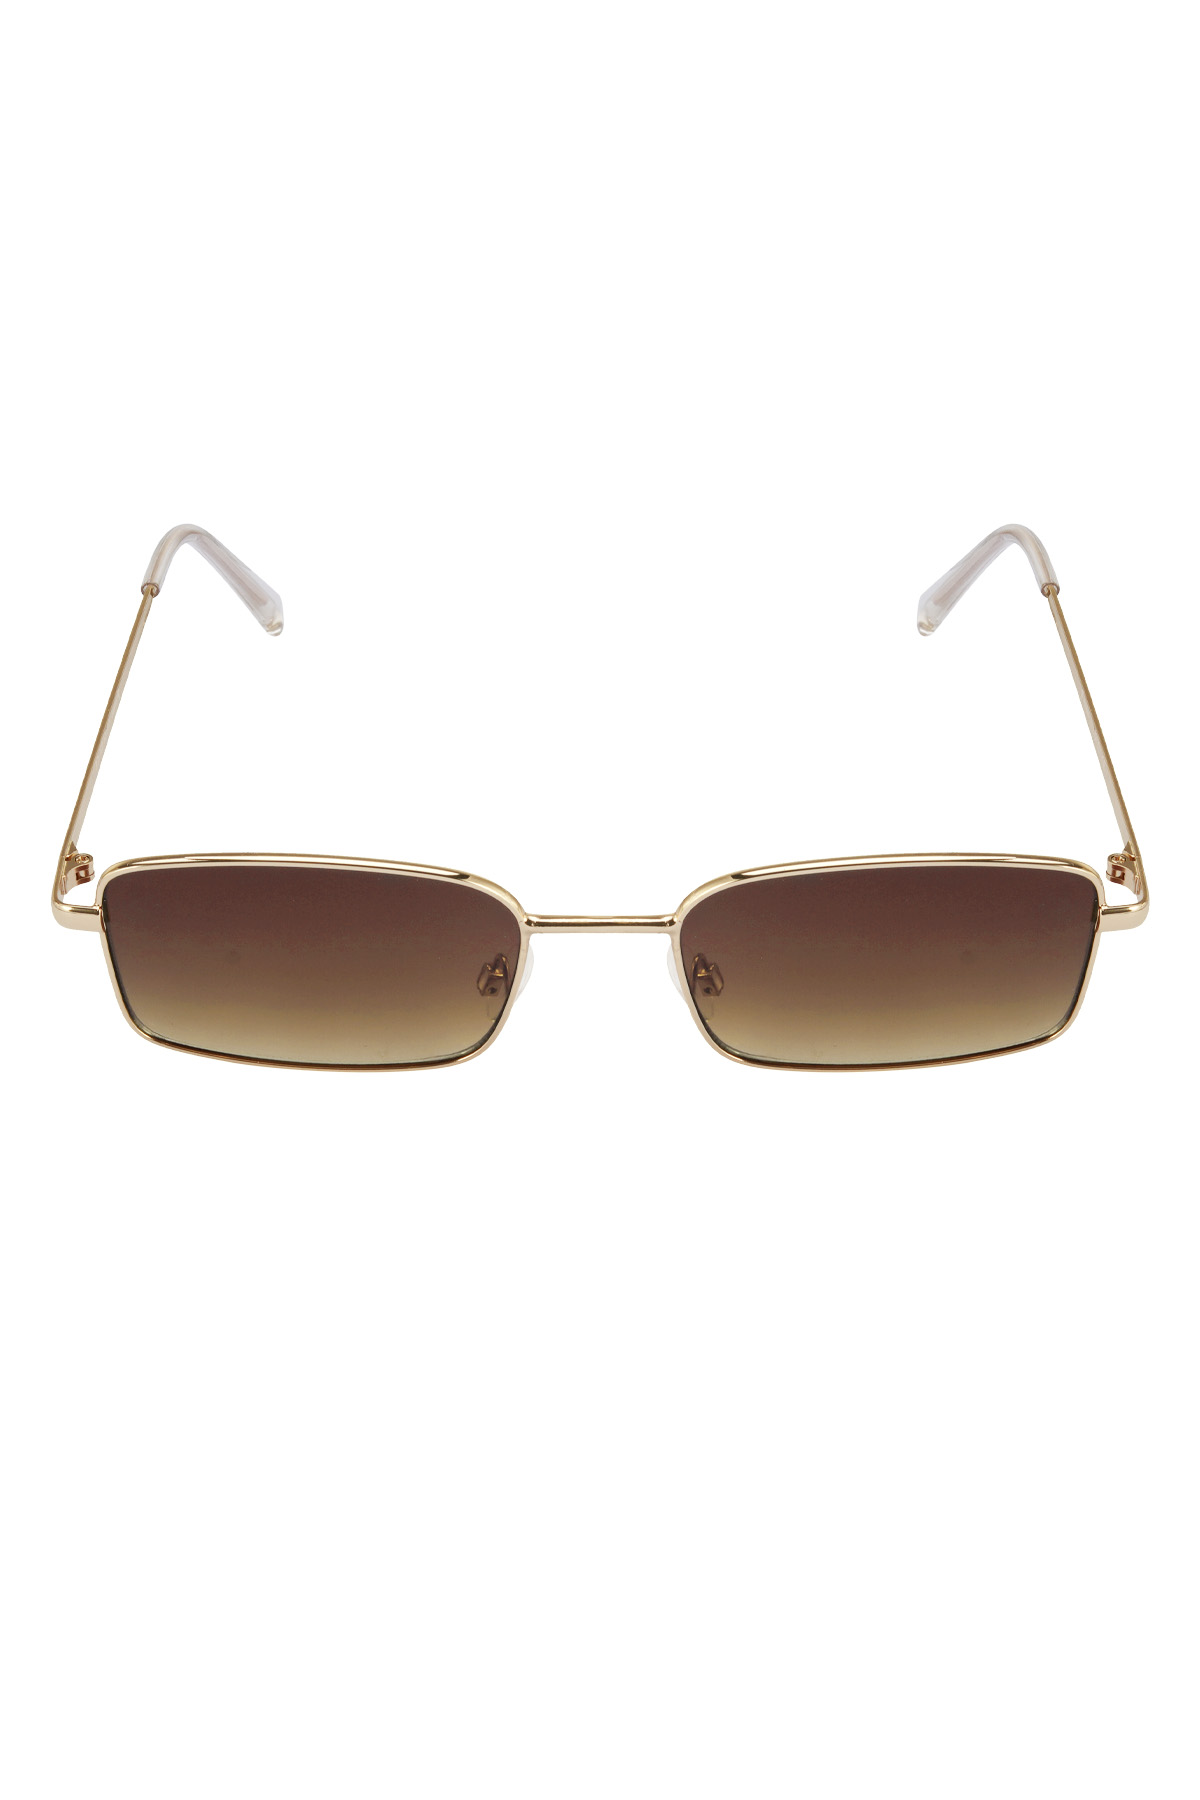 Sunglasses radiant view - camel h5 Picture4